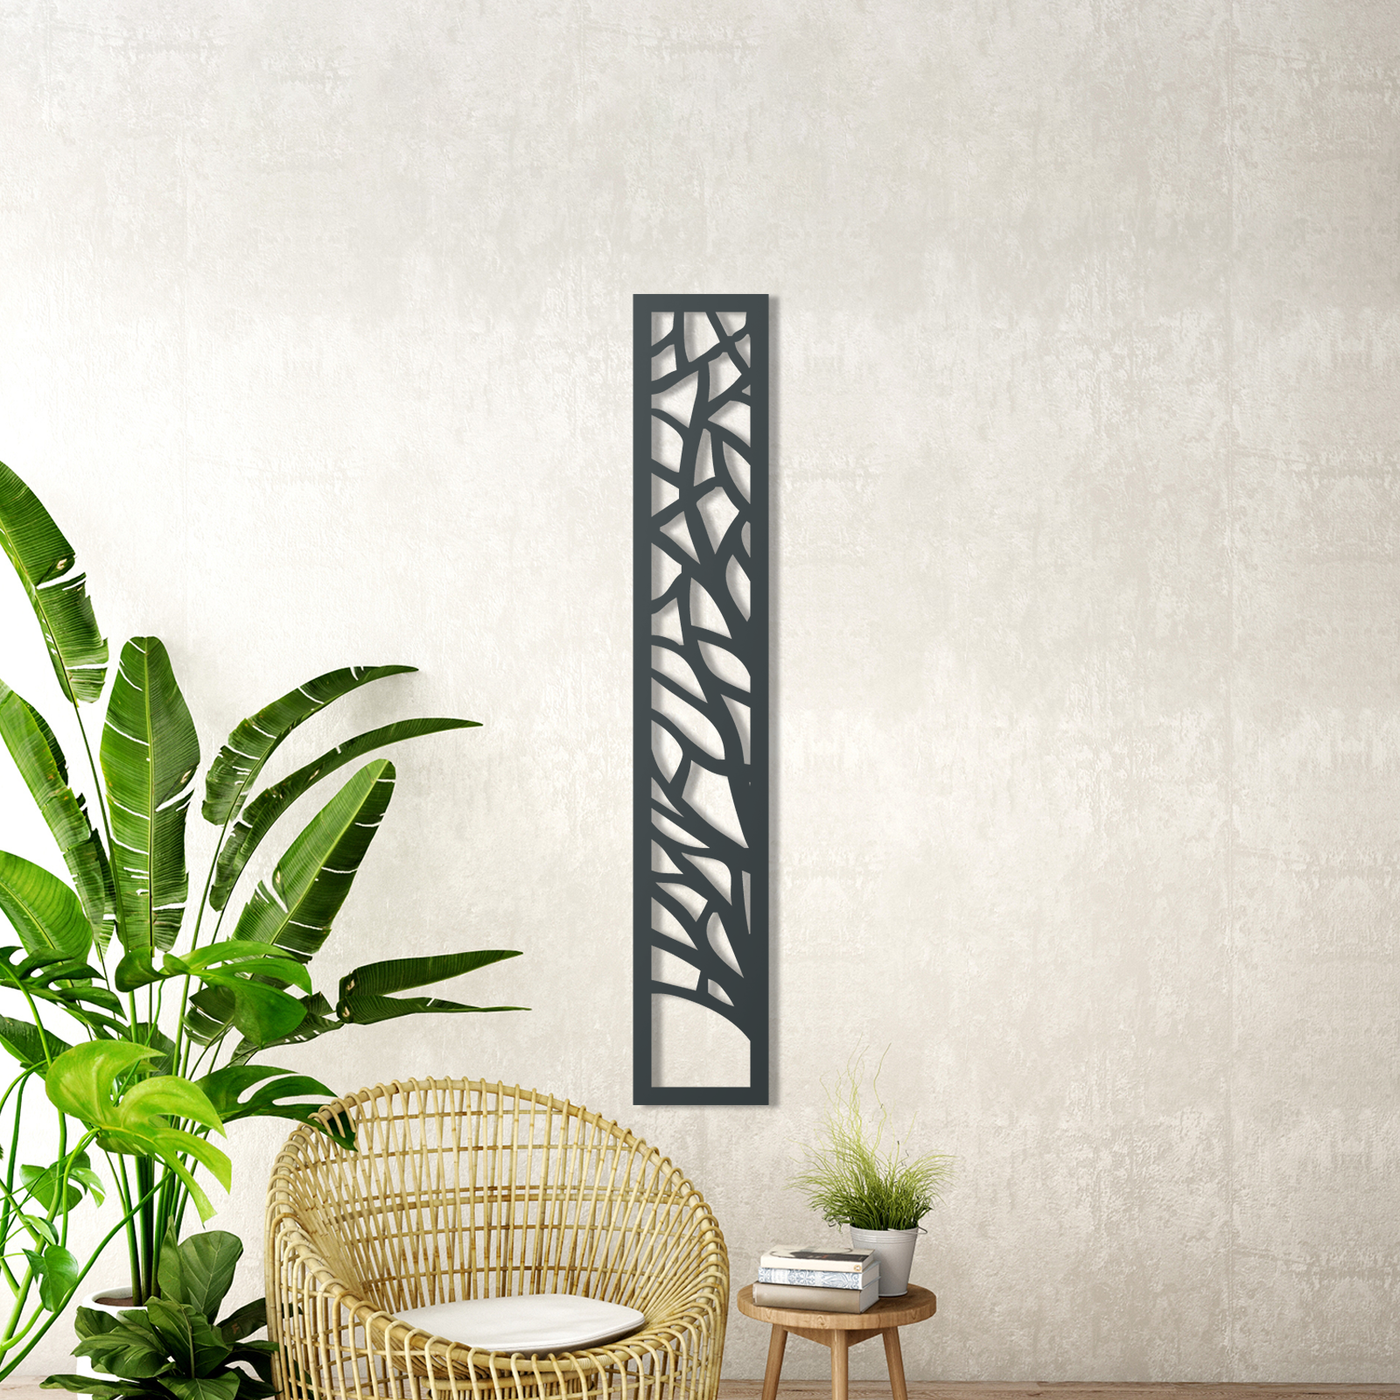 West Wind Metal Garden Screen: A Great Way to Add Style and Privacy to Your Outdoor Space